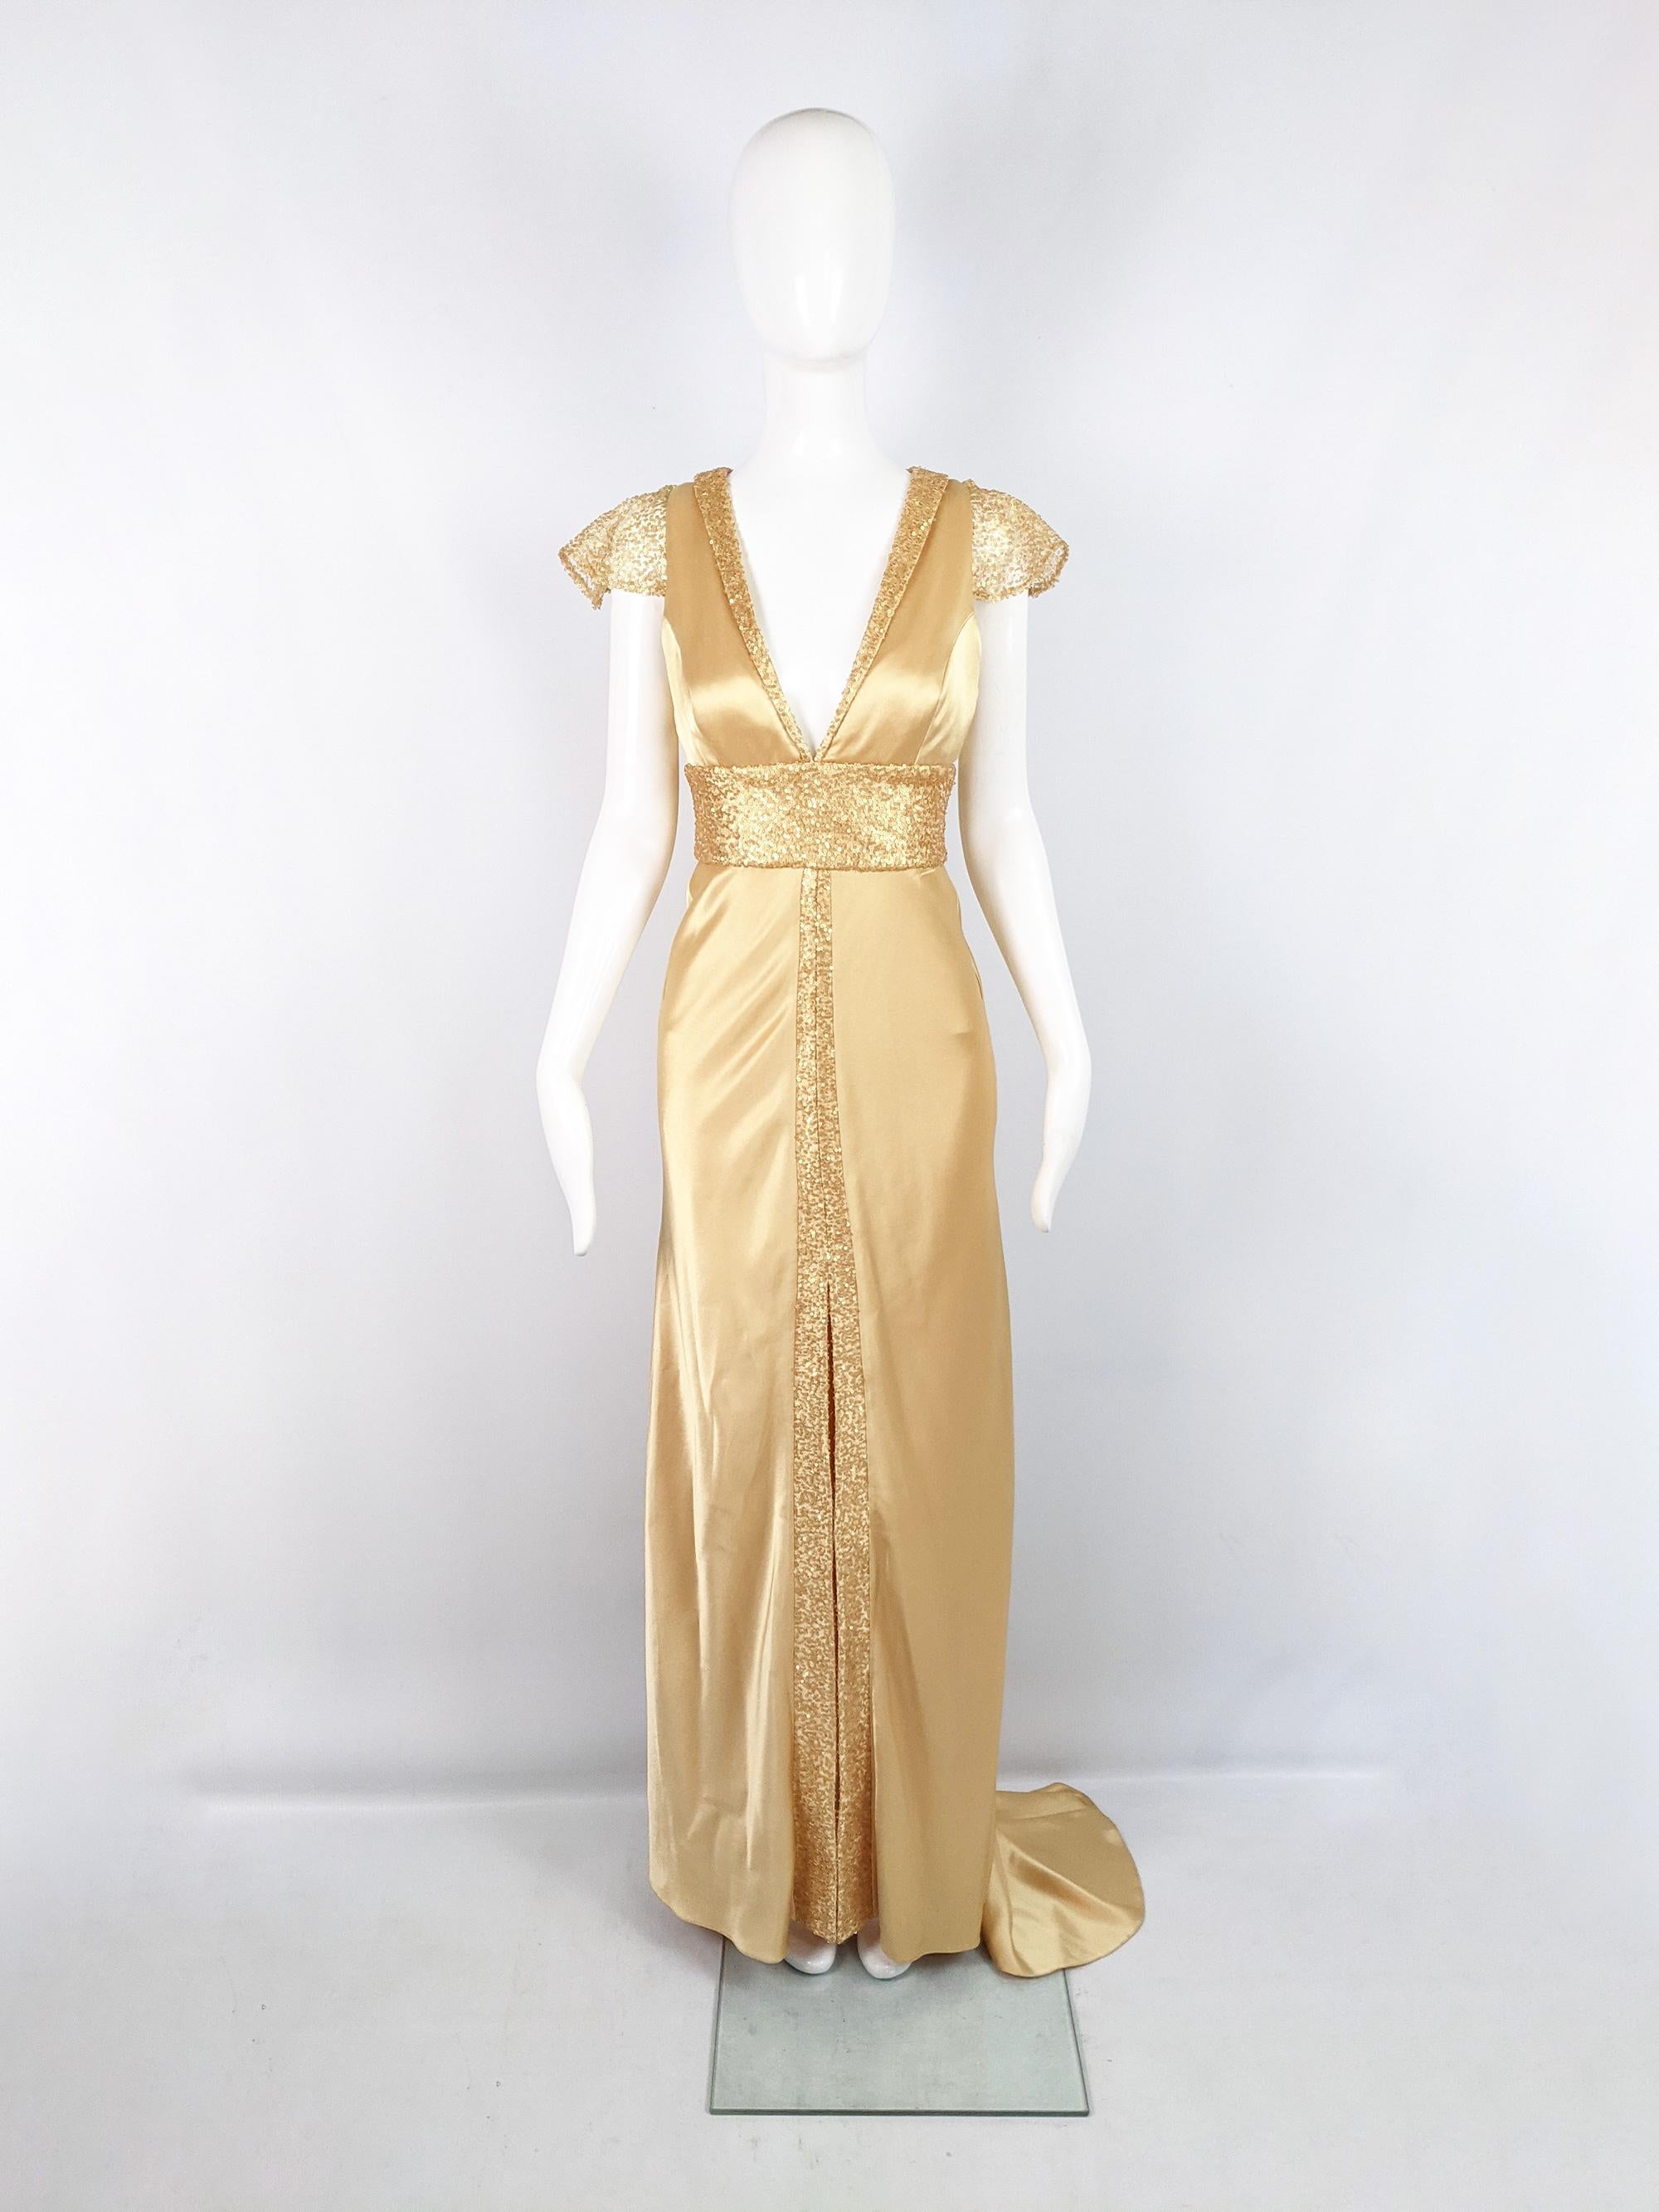 A breathtaking vntage evening gown from the 90s by luxury British fashion designer, David Fielden who has dressed the likes of  Elizabeth Taylor, Julia Roberts, Bette Midler and Bianca Jagger. Incredible quality, in a gold silk charmeuse satin with